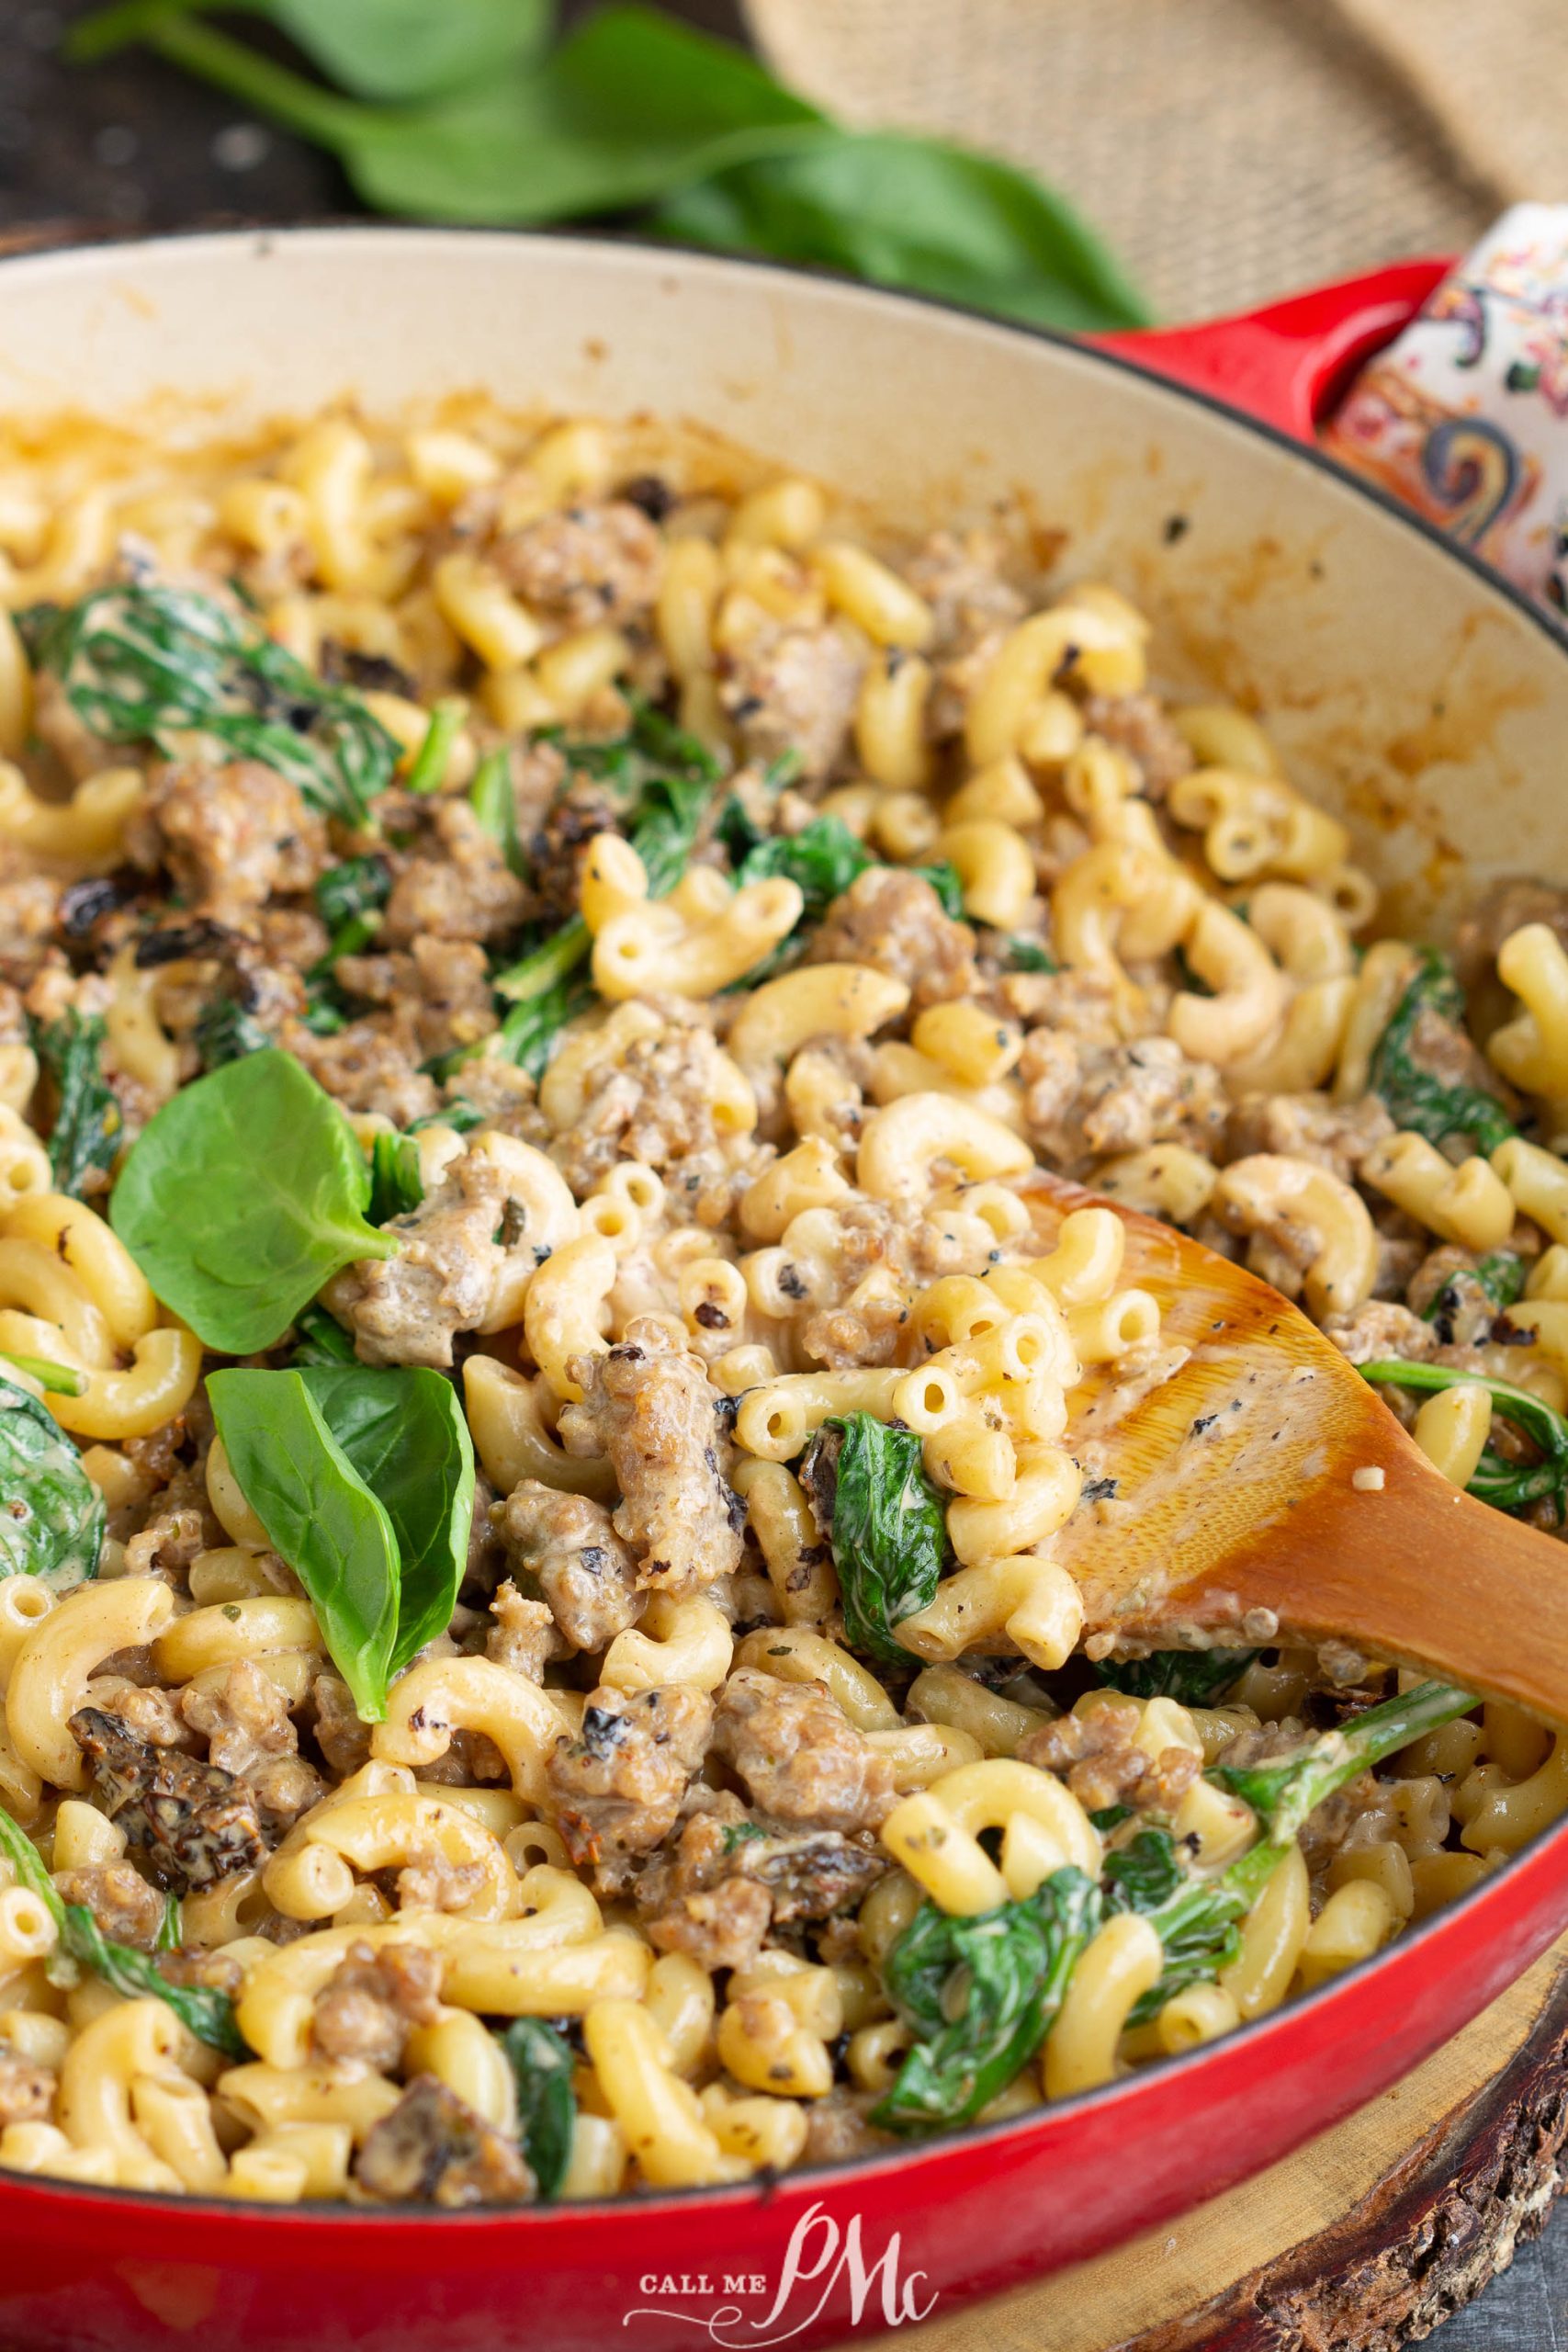 Italian sausage and spinach are cooked together with mac and cheese in a red skillet to create a delicious and flavorful Italian Sausage Pasta dish.